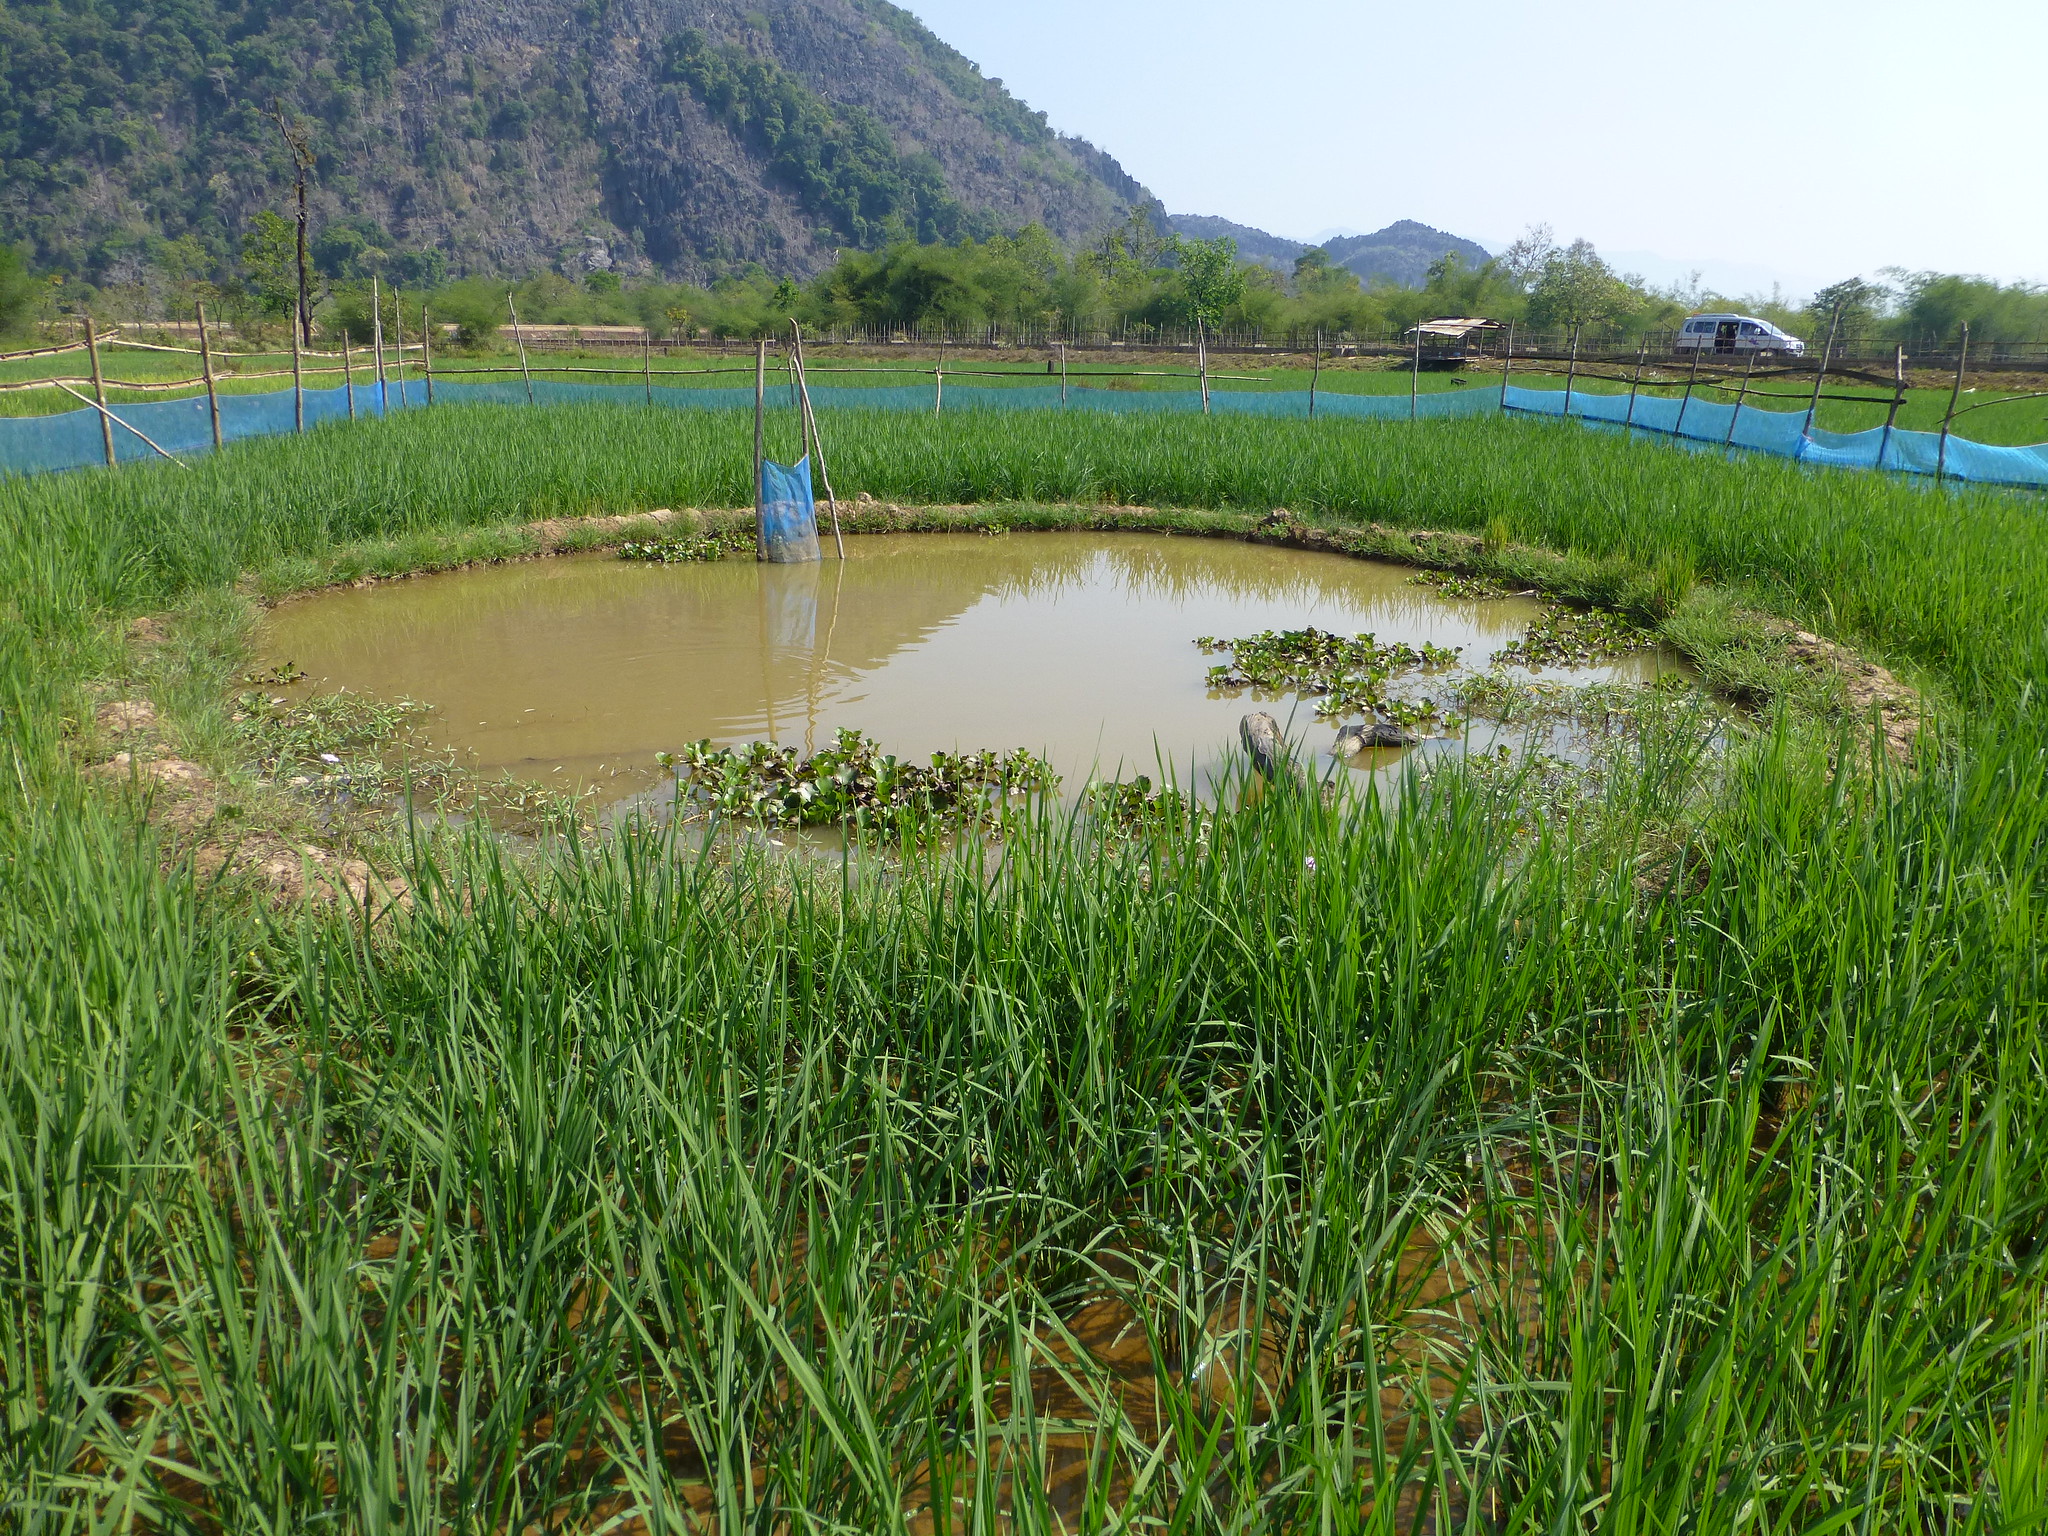 Integrated rice-fish farming system in Laos. Photo by Jharendu Pant.